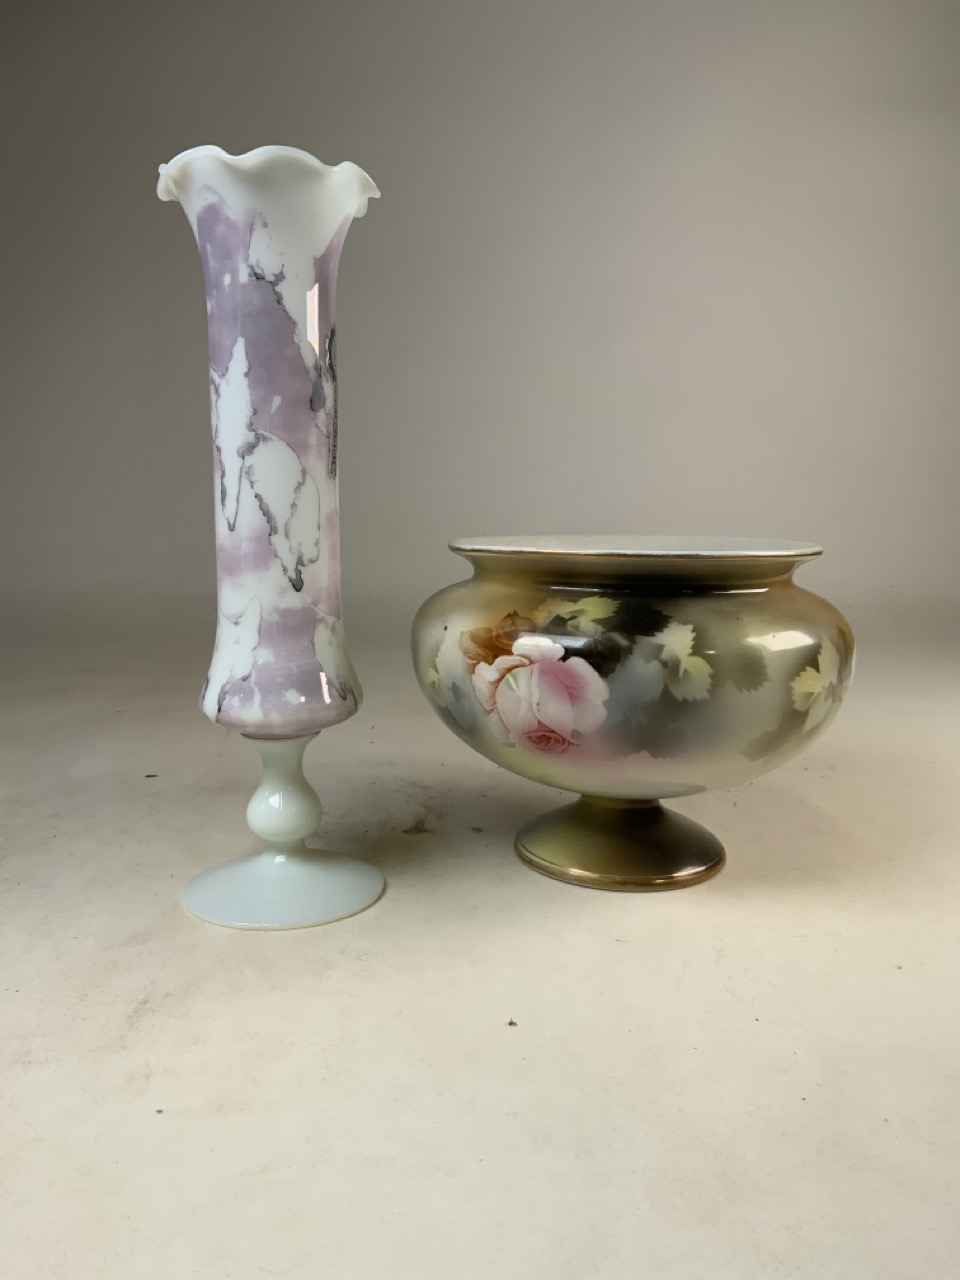 Dixonion floral vase also with an Italian glass stem vase.